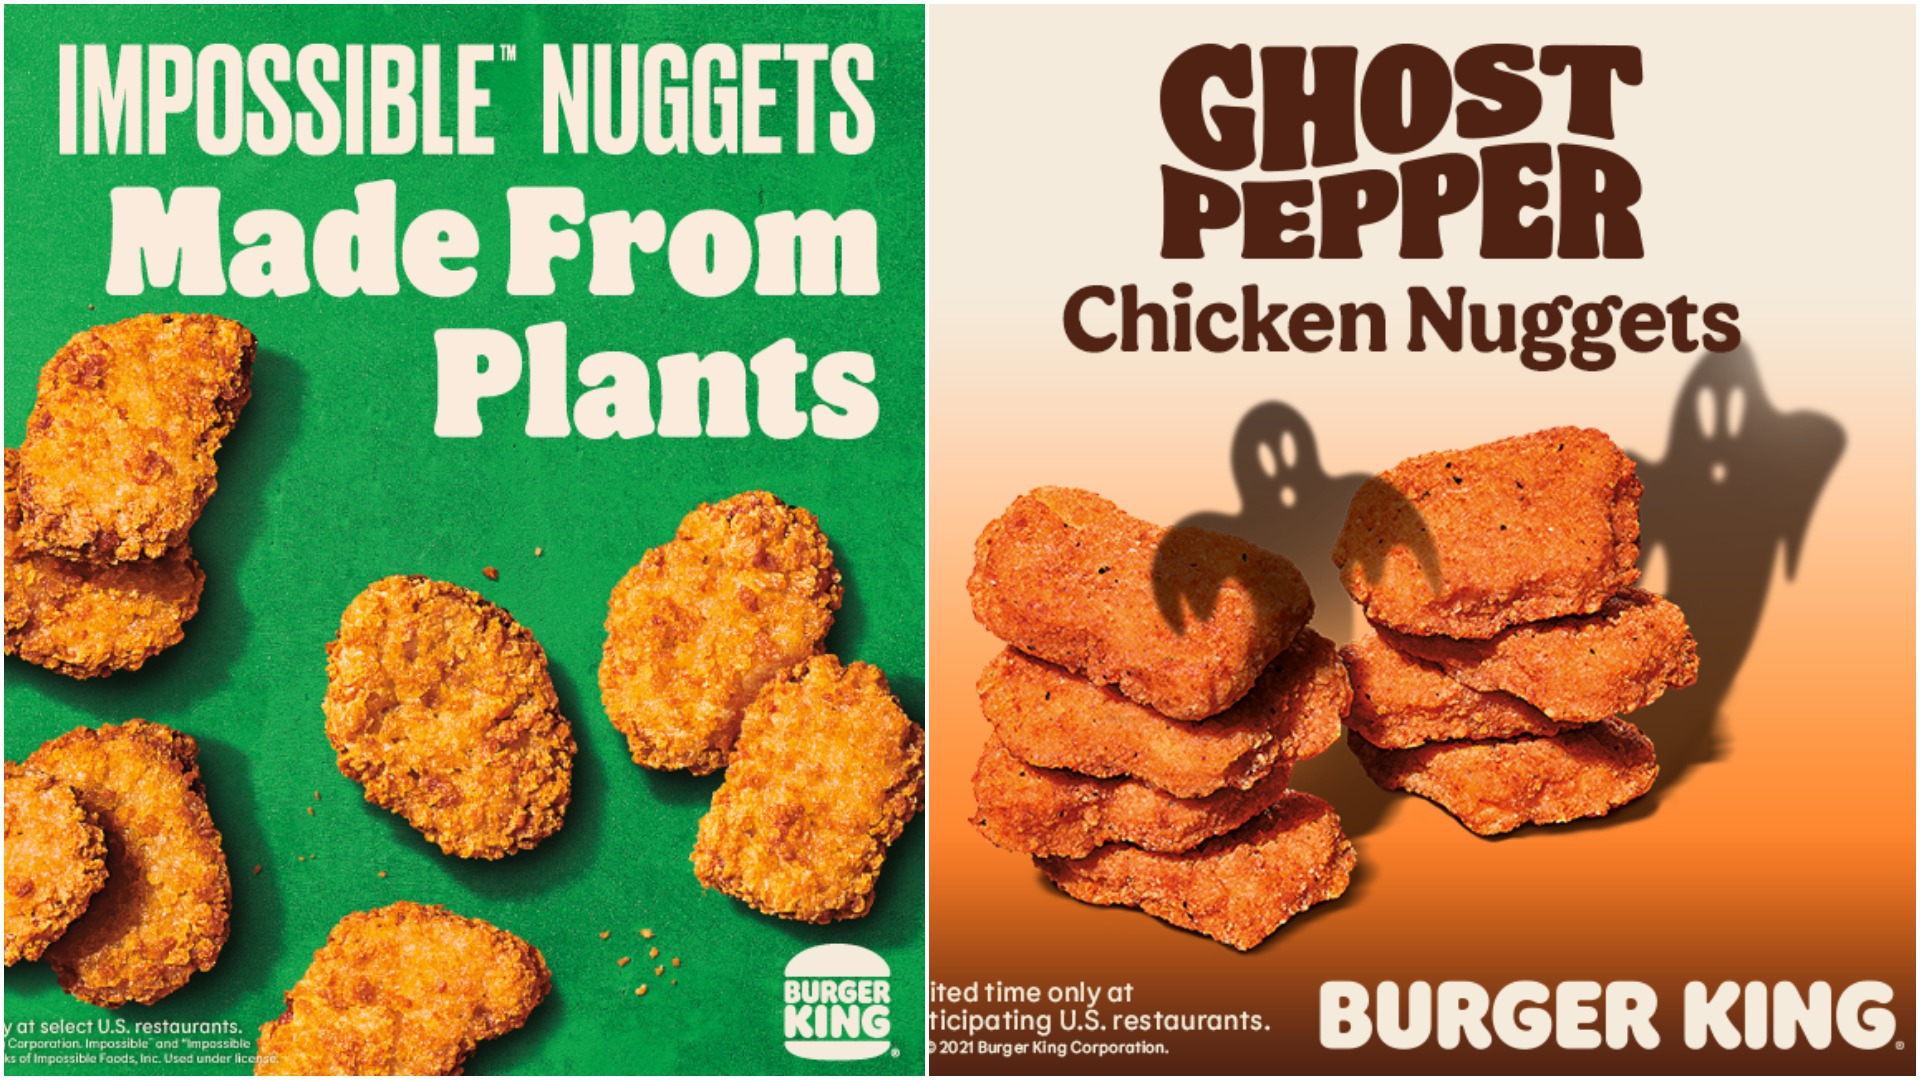 Left: Promotional image for Impossible Nuggets. Right: Promotional image for Ghost Pepper Chicken Nuggets.